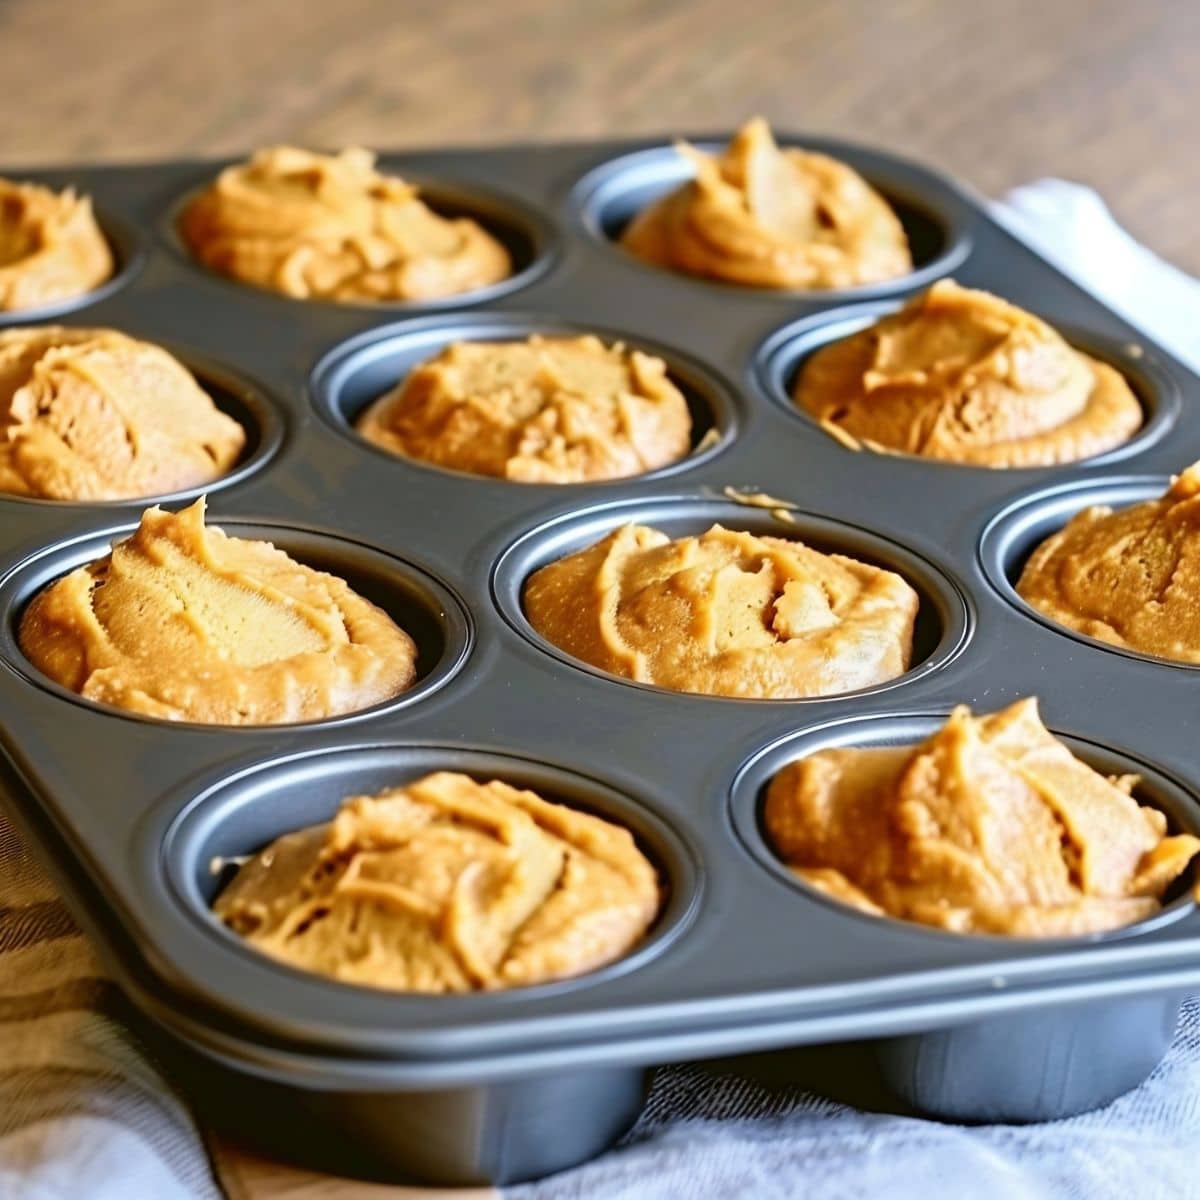 Two-Ingredient Pumpkin Muffin Uncooked Batter in a Muffin Tray, Ready to Go in the Oven